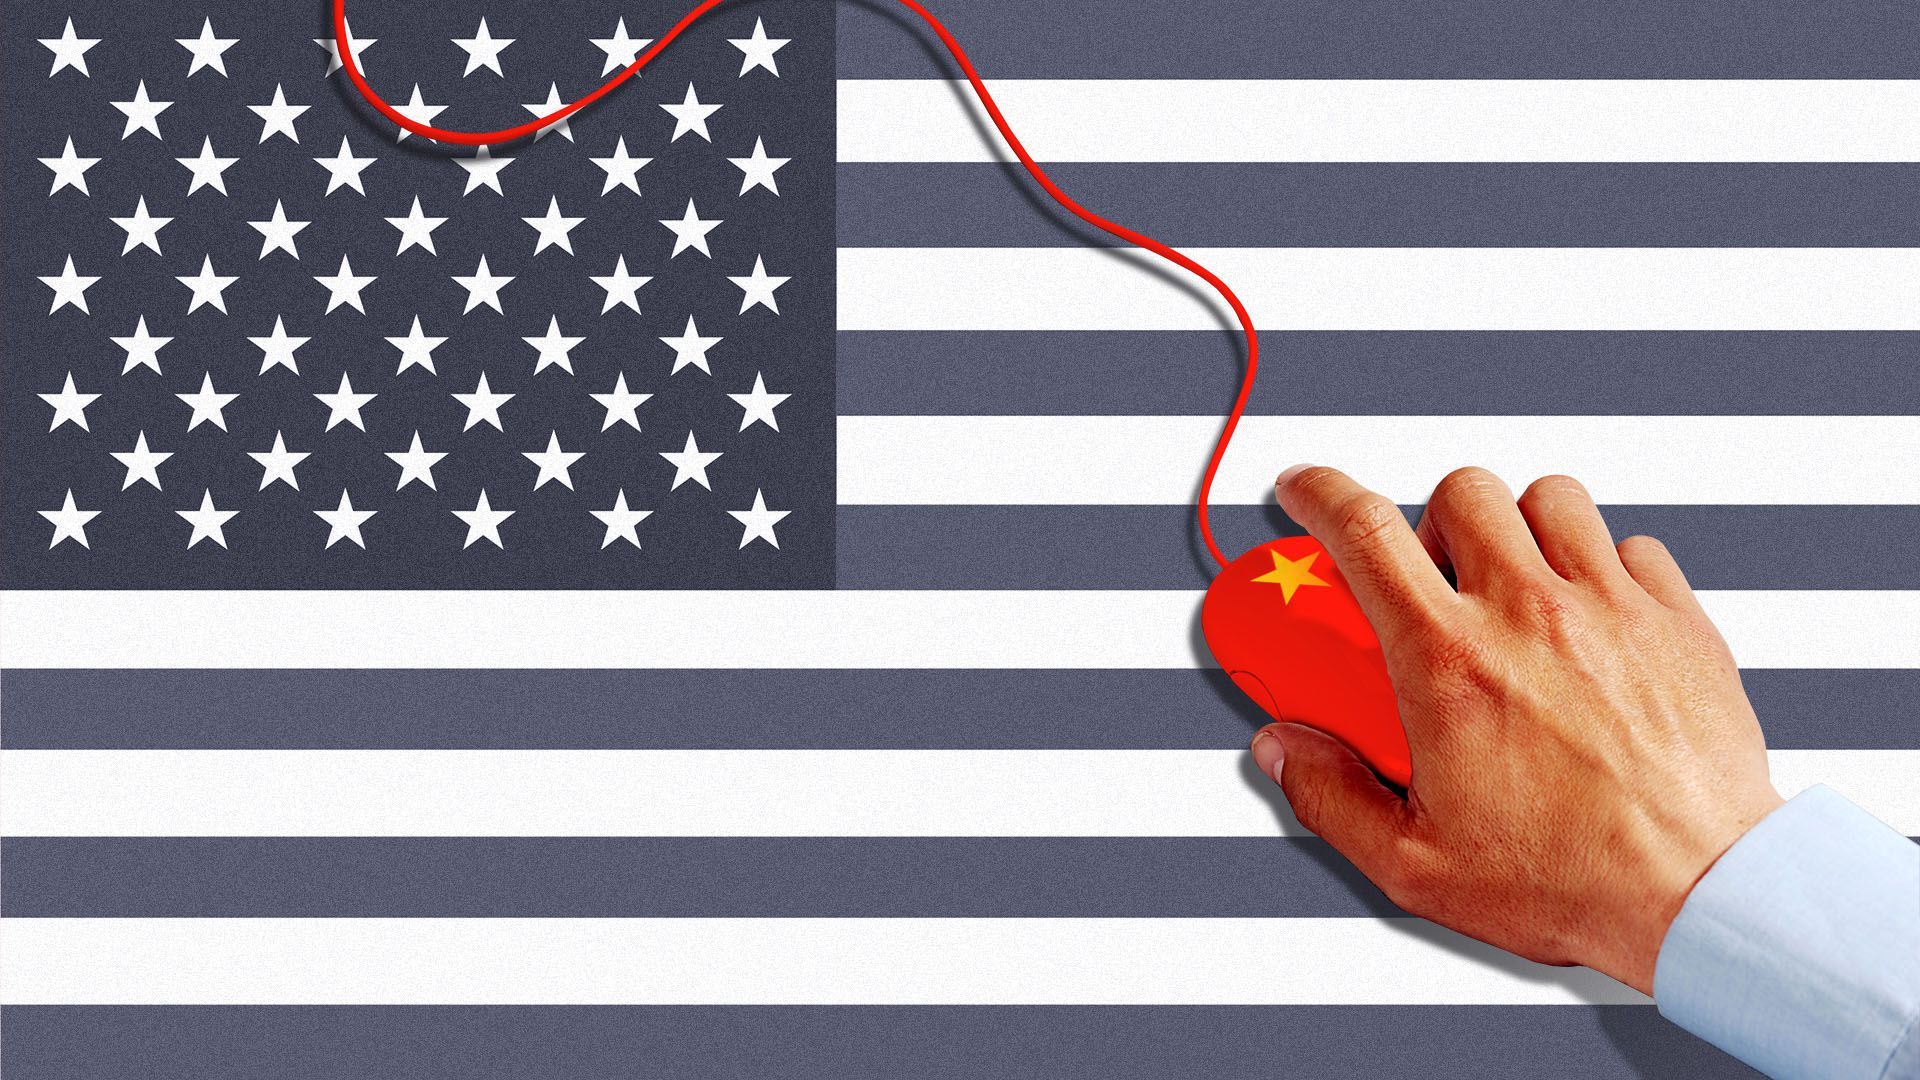 Illustration of a blue American flag with a red mouse with a star on it representing the Chinese flag